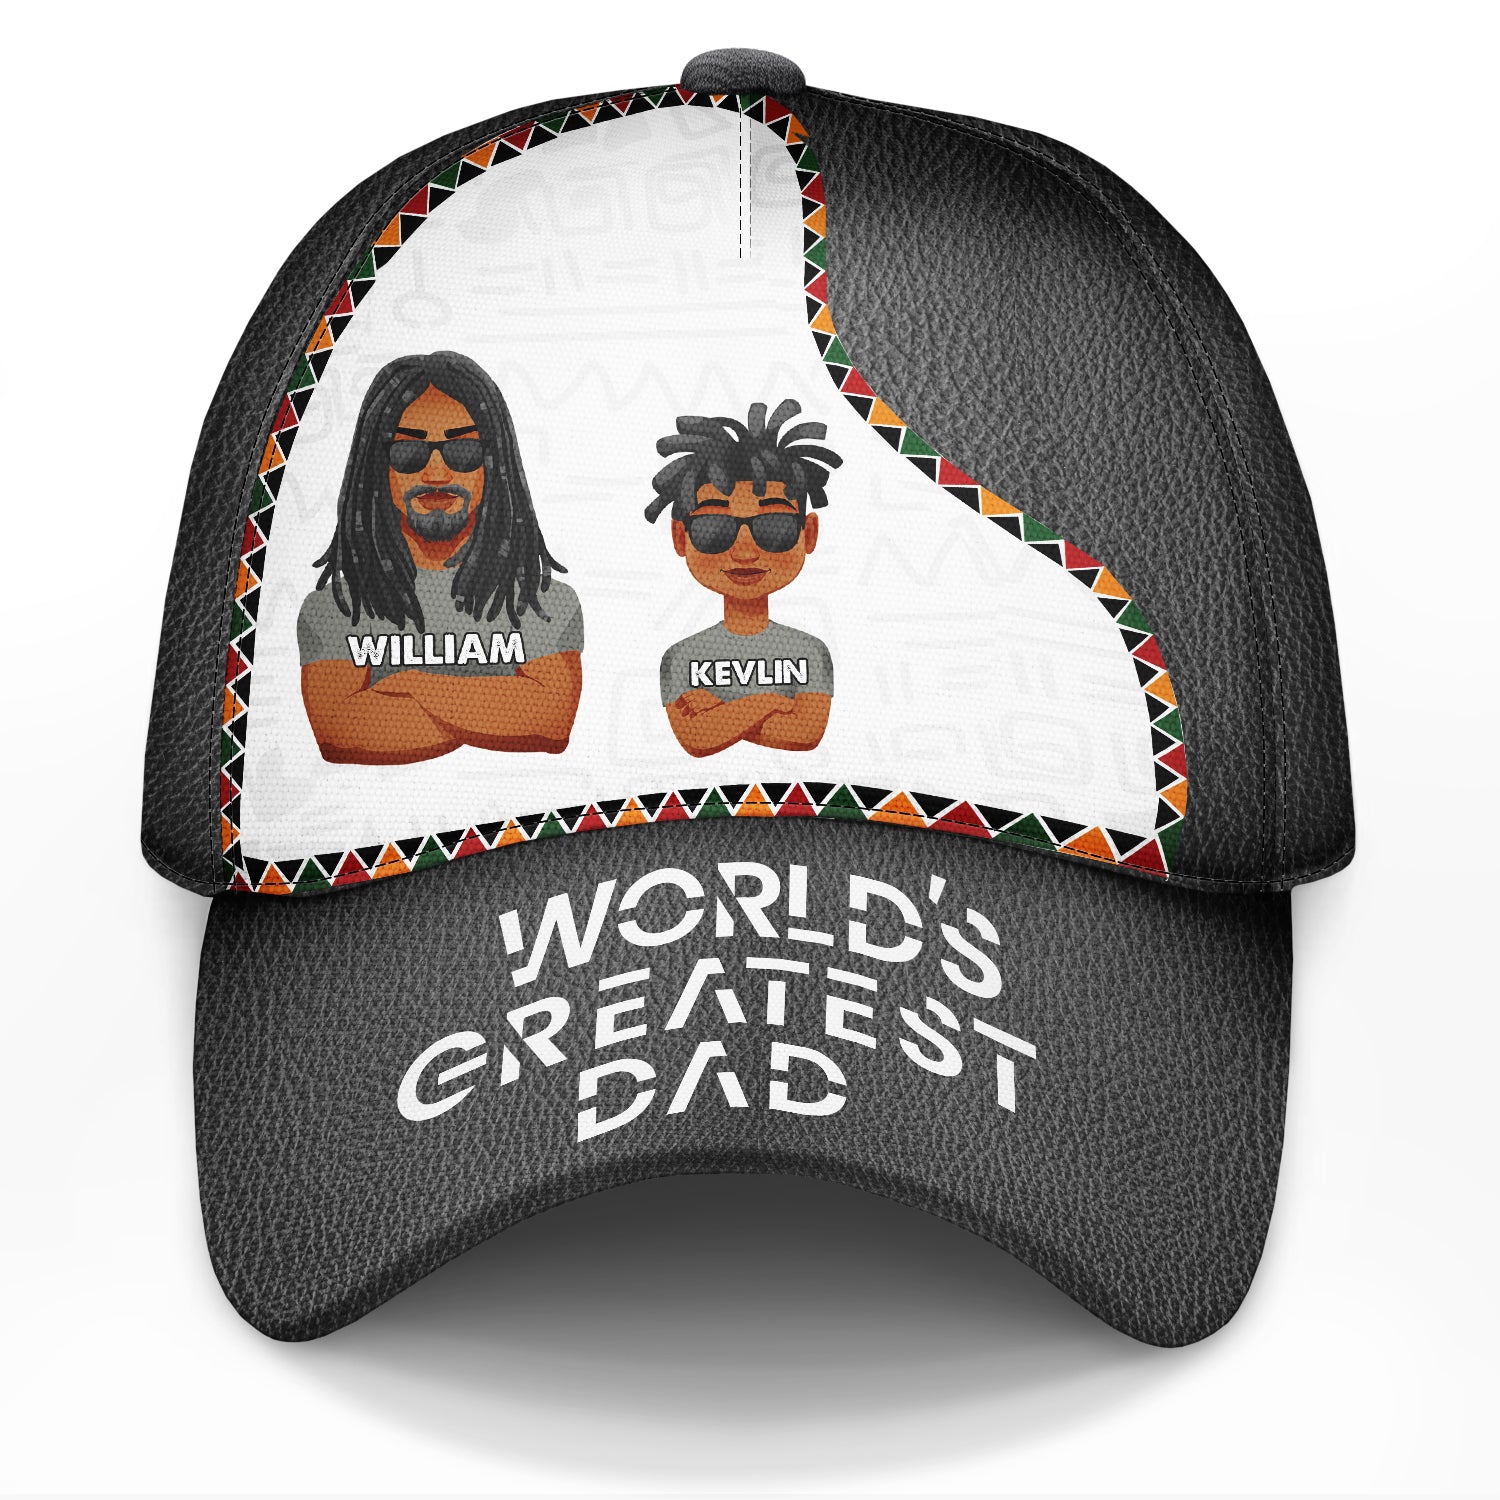 World's Greatest Dad - Best Gift For Dad - Personalized Classic Cap